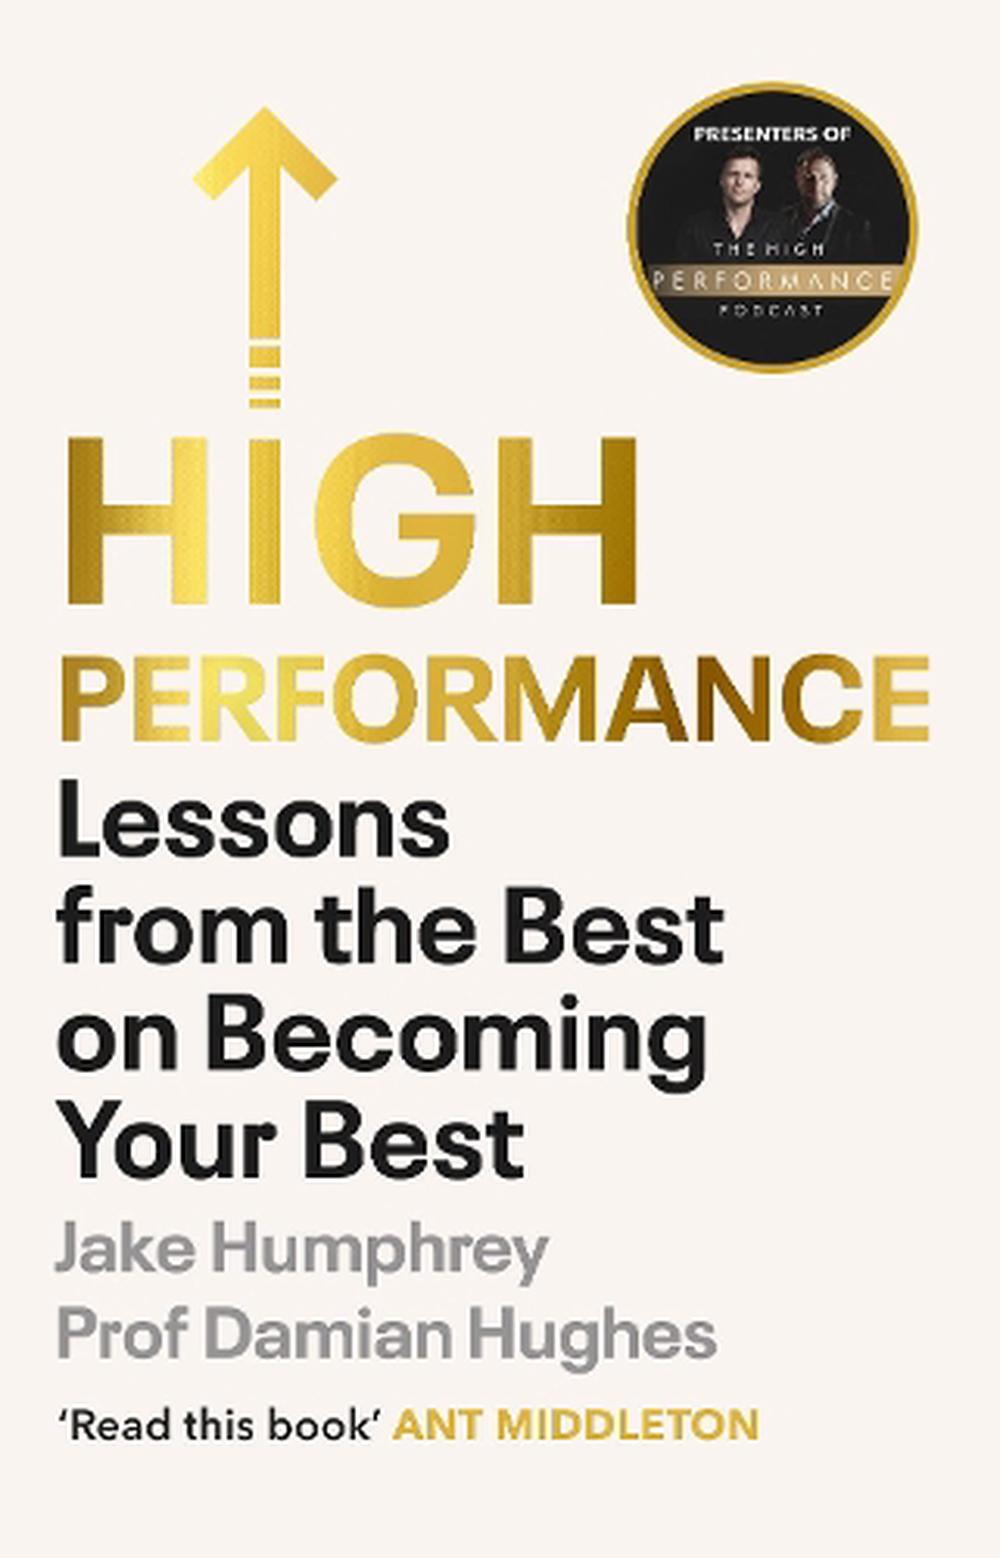 High Performance: Lessons from the Best on Becoming Your Best by Jake Humphrey and Damian Hughes